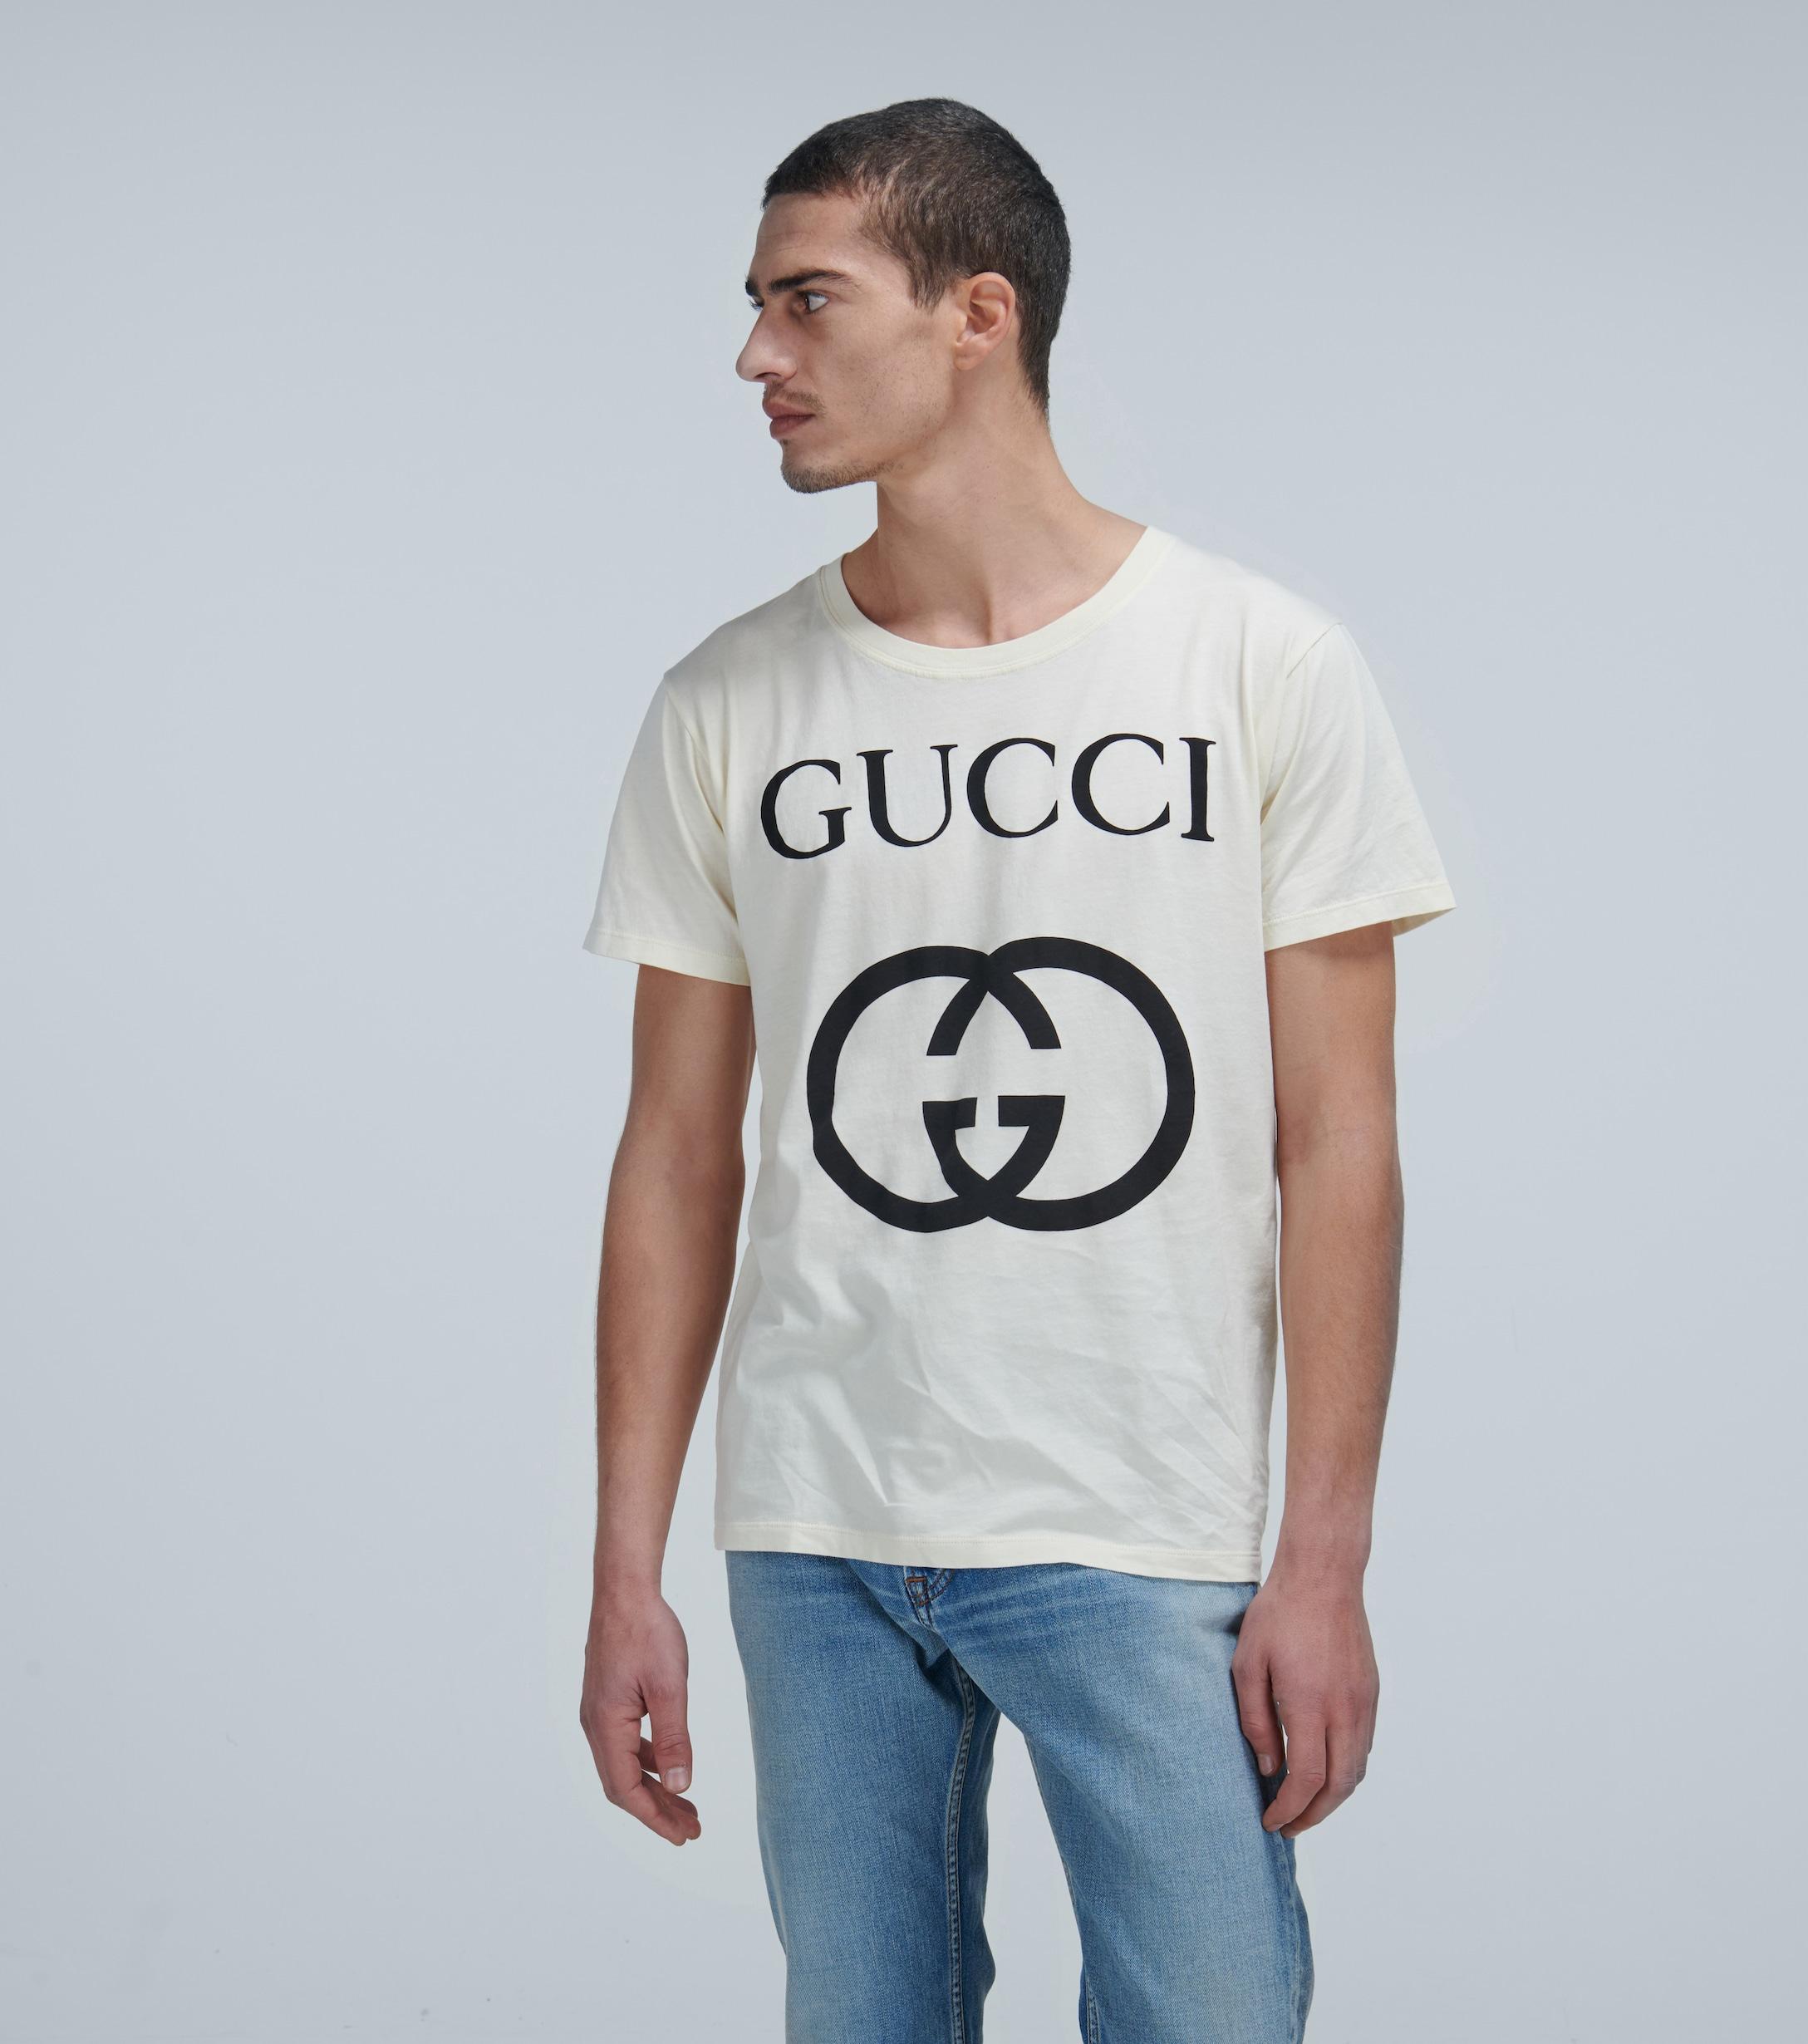 Gucci Oversize T-shirt With Interlocking G in White for Men - Save 38% |  Lyst